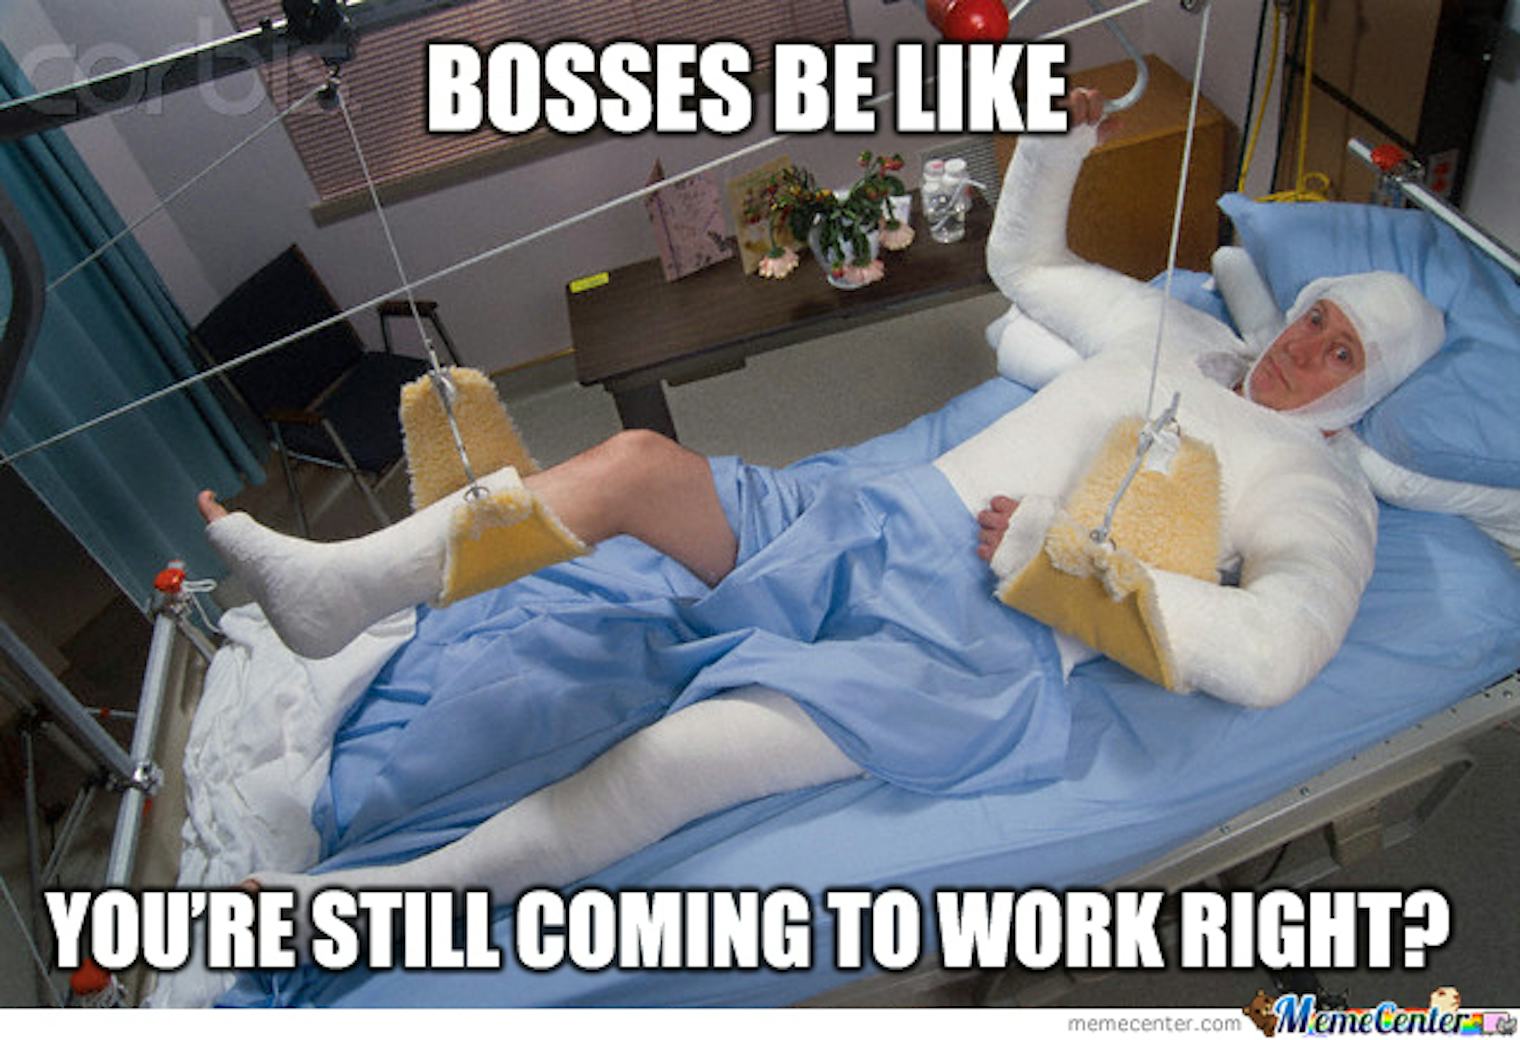 13 National Boss Day Memes To Share On Facebook That Won't Get You In